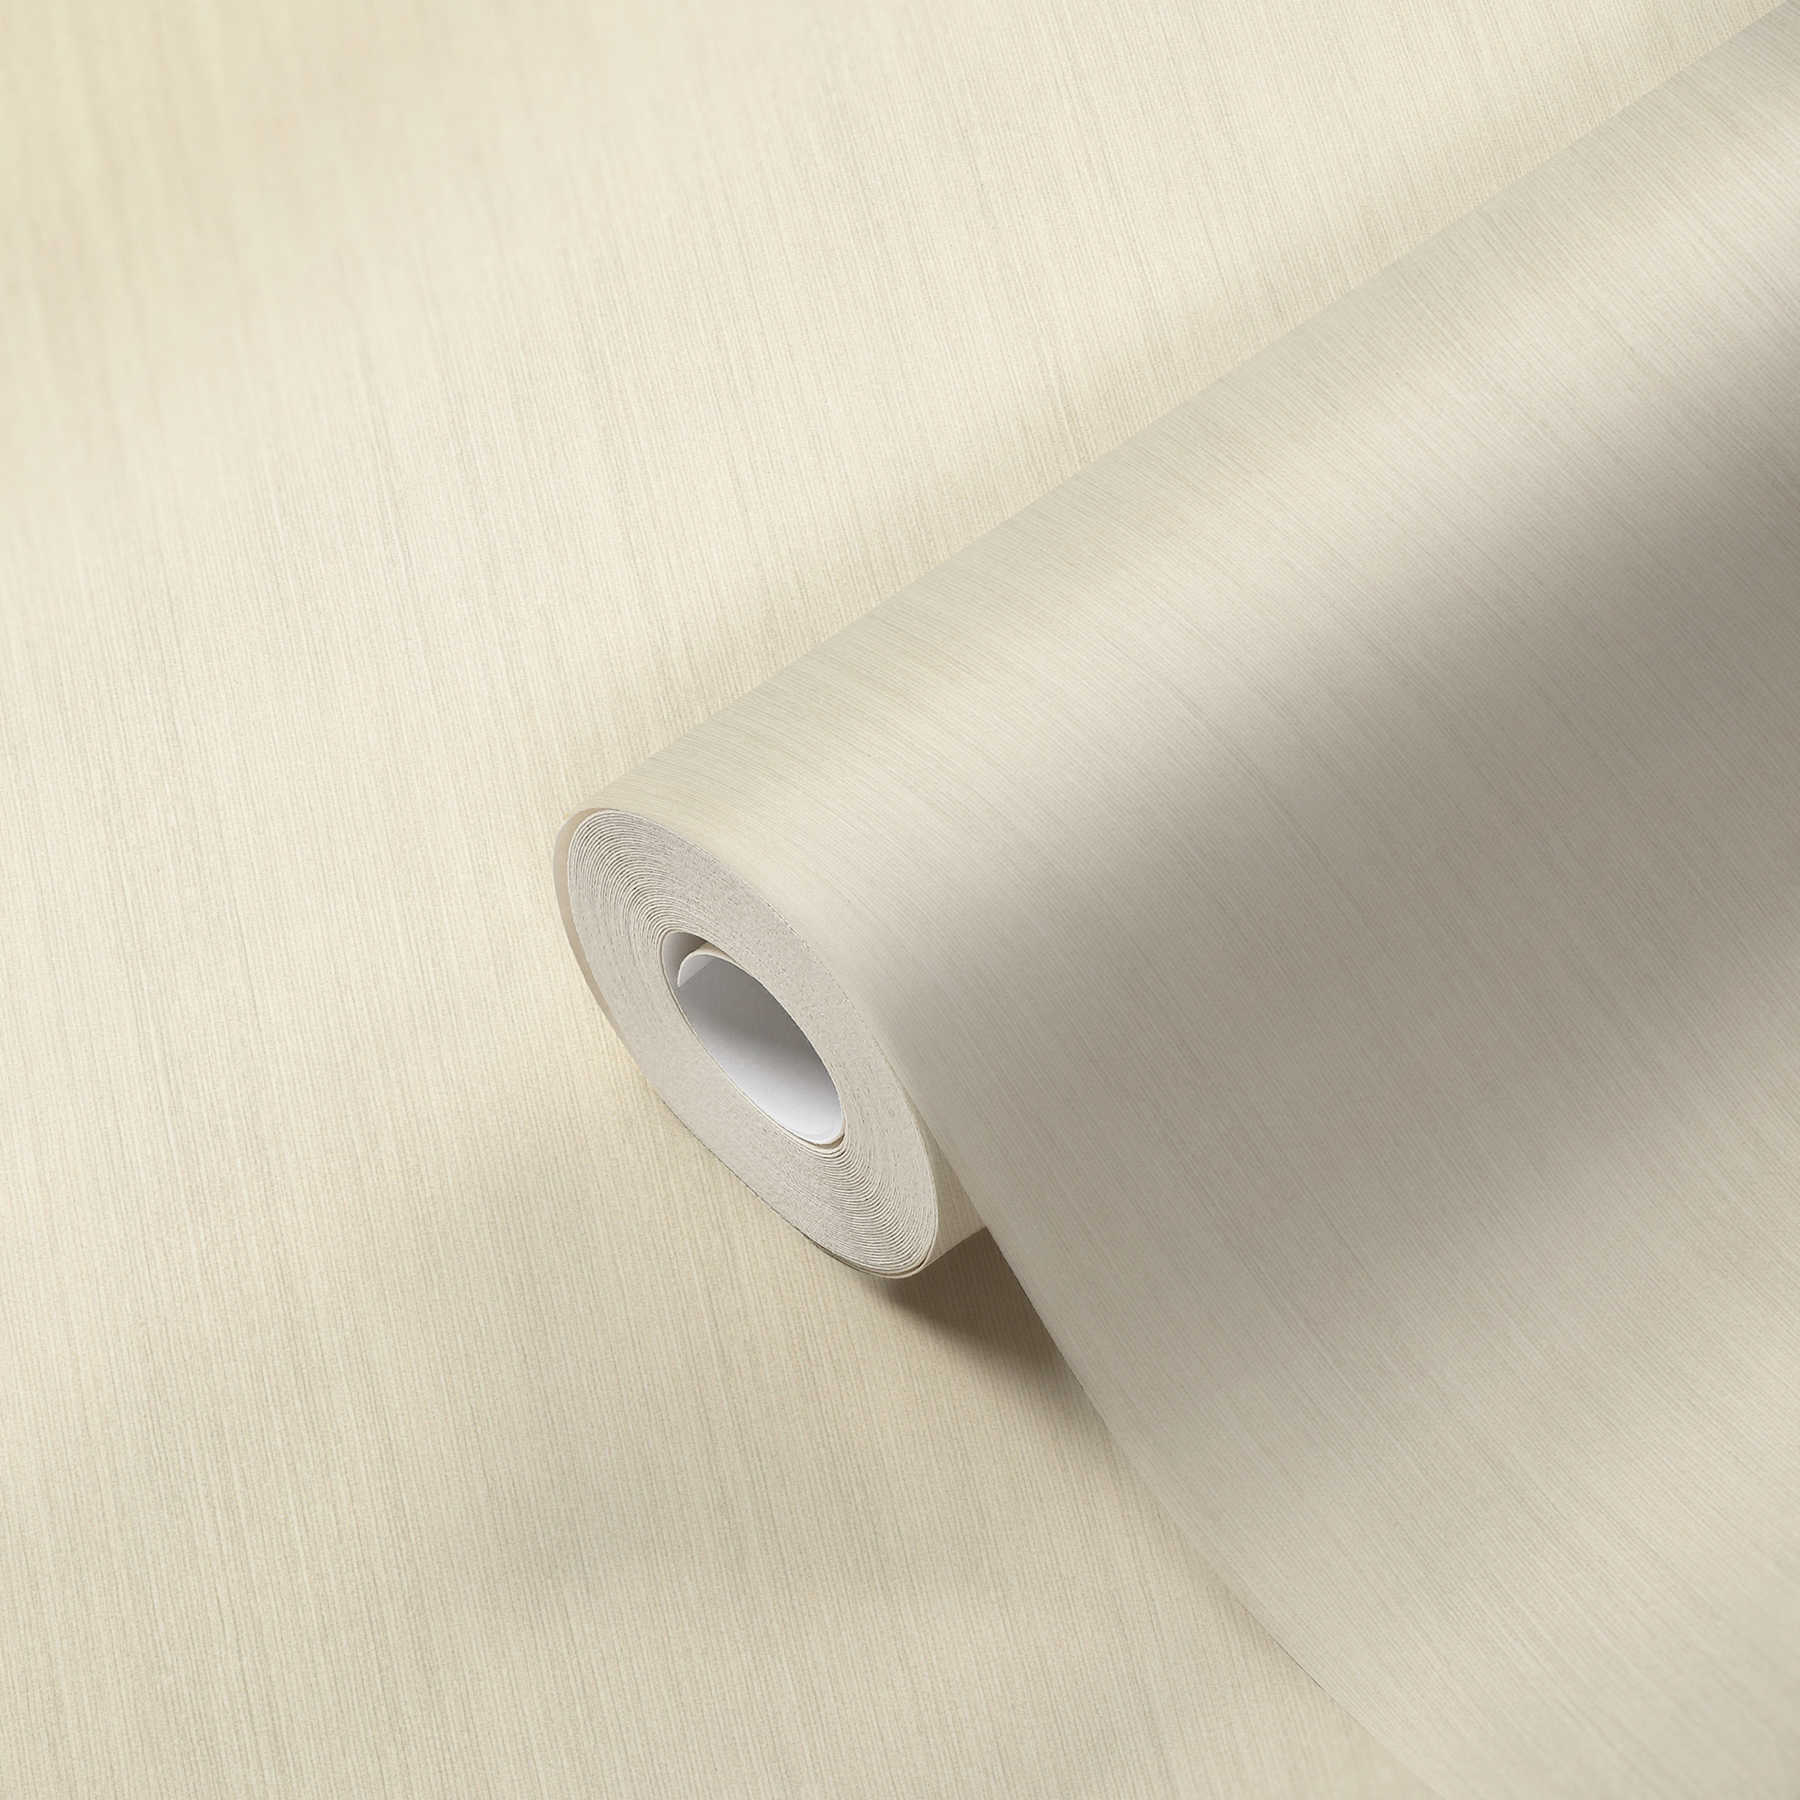             Plain wallpaper cream-beige with embossed pattern & matte surface
        